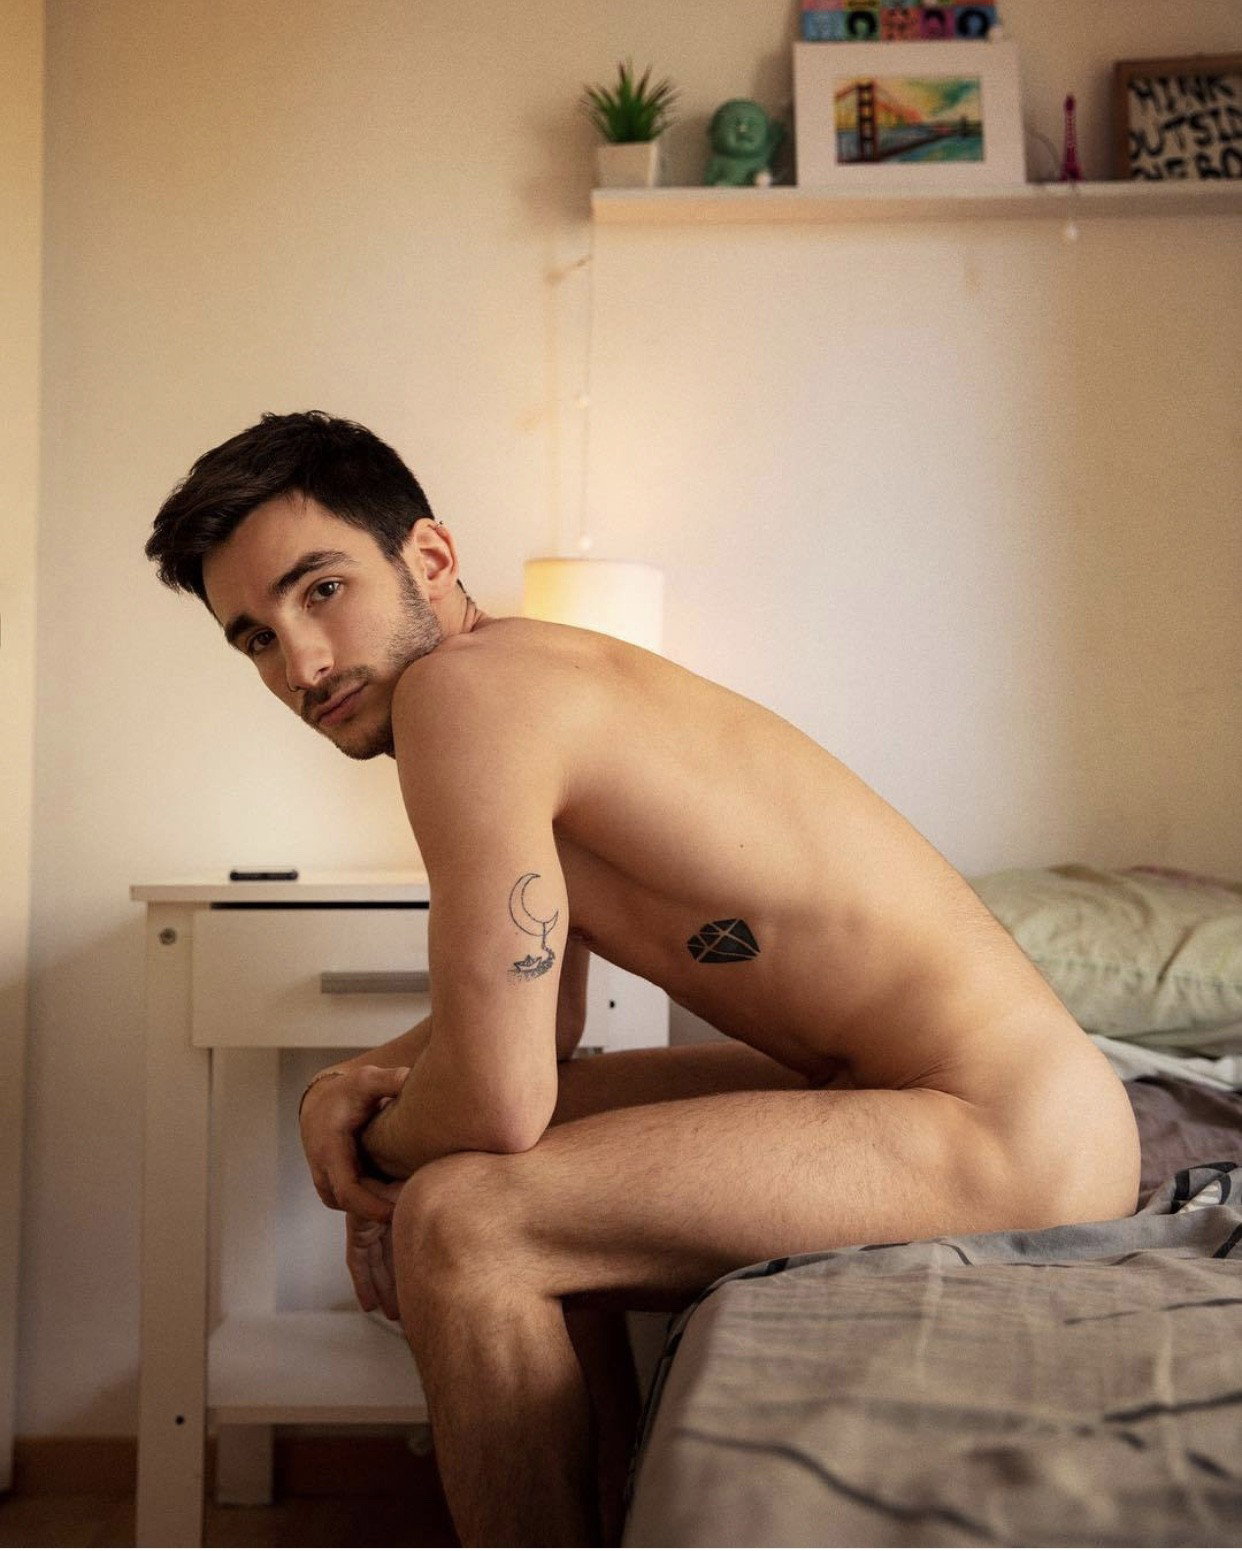 Photo by LeFoutre with the username @LeFoutre,  December 13, 2018 at 3:07 PM. The post is about the topic Just Hot Guys and the text says 'Hot naked dude, just sittin' in bed'